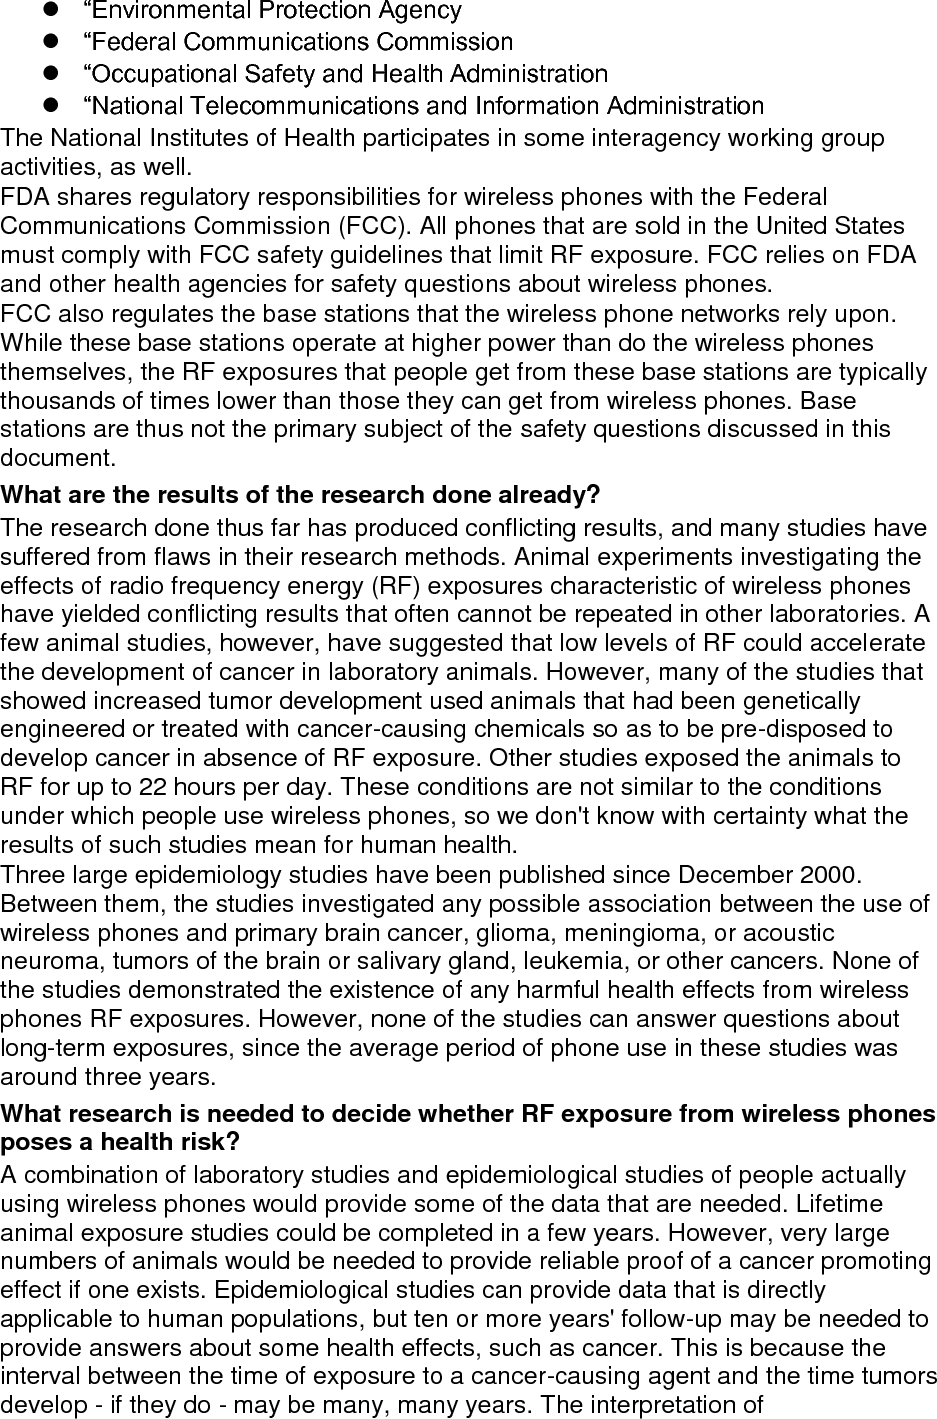 epidemiological studies is hampered by difficulties in measuring actual RF exposure during day-to-day use of wireless phones. Many factors affect this measurement, such as the angle at which the phone is held, or which model of phone is used. What is FDA doing to find out more about the possible health effects of wireless phone RF? FDA is working with the U.S. National Toxicology Program and with groups of investigators around the world to ensure that high priority animal studies are conducted to address important questions about the effects of exposure to radio frequency energy (RF). FDA has been a leading participant in the World Health Organization international Electromagnetic Fields (EMF) Project since its inception in 1996. An influential result of this work has been the development of a detailed agenda of research needs that has driven the establishment of new research programs around the world. The Project has also helped develop a series of public information documents on EMF issues. FDA and Cellular Telecommunications &amp; Internet Association (CTIA) have a formal Cooperative Research and Development Agreement (CRADA) to do research on wireless phone safety. FDA provides the scientific oversight, obtaining input from experts in government, industry, and academic organizations. CTIA-funded research is conducted through contracts to independent investigators. The initial research will include both laboratory studies and studies of wireless phone users. The CRADA will also include a broad assessment of additional research needs in the context of the latest research developments around the world. What steps can I take to reduce my exposure to radio frequency energy from my wireless phone? If there is a risk from these products - and at this point we do not know that there is - it is probably very small. But if you are concerned about avoiding even potential risks, you can take a few simple steps to minimize your exposure to radio frequency energy (RF). Since time is a key factor in how much exposure a person receives, reducing the amount of time spent using a wireless phone will reduce RF exposure.  “If you must conduct extended conversations by wireless phone every day, you could place more distance between your body and the source of the RF, since the exposure level drops off dramatically with distance. For example, you could use a headset and carry the wireless phone away from your body. Again, the scientific data do not demonstrate that wireless phones are harmful. But if you are concerned about the RF exposure from these products, you can use measures like those described above to reduce your RF exposure from wireless phone use. What about children using wireless phones? The scientific evidence does not show a danger to users of wireless phones, including children and teenagers. If you want to take steps to lower exposure to radio frequency energy (RF), the measures described above would apply to children and teenagers using wireless phones. Reducing the time of wireless phone use and increasing the distance between the user and the RF source will reduce RF exposure. Some groups sponsored by other national governments have advised that children be discouraged from using wireless phones at all. For example, the government in 